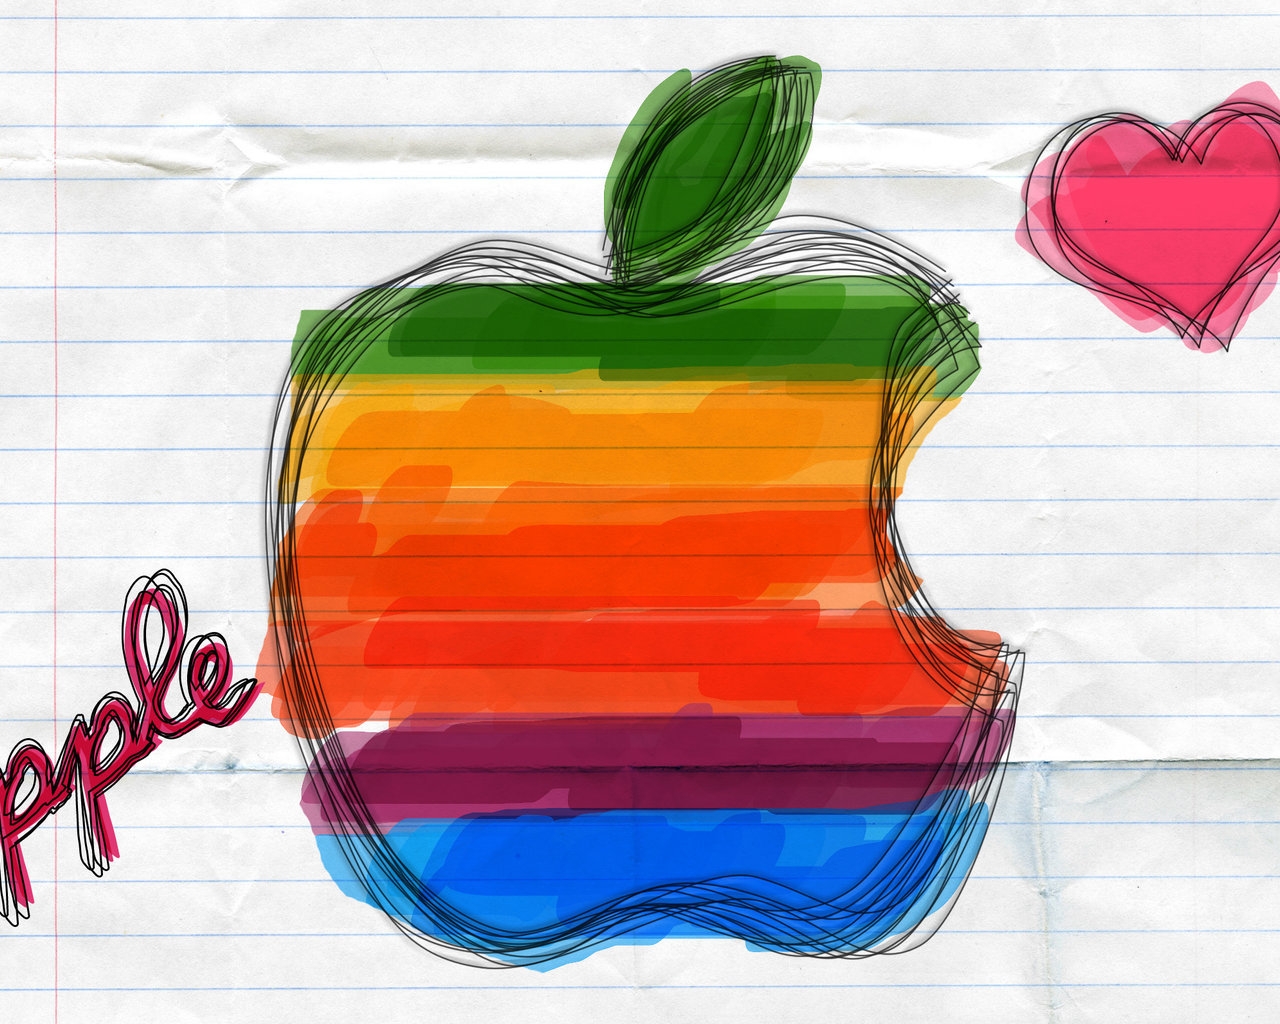 Colourful Apple logo for 1280 x 1024 resolution